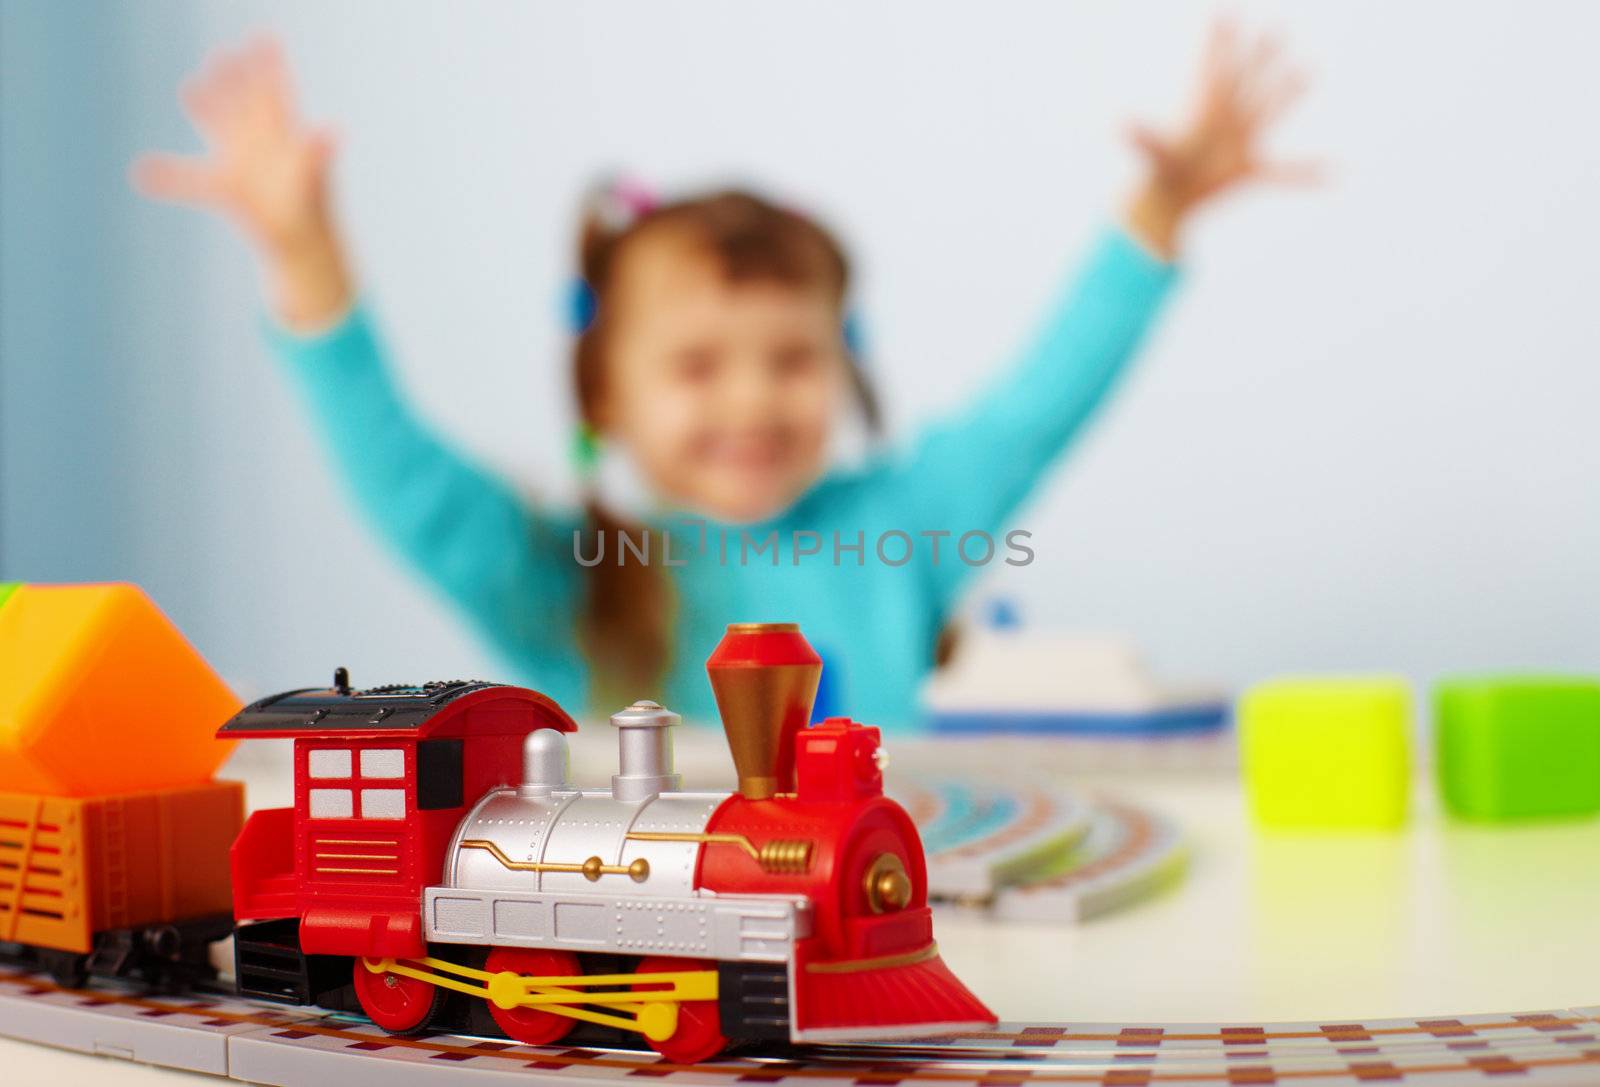 A happy child playing with a toy railway